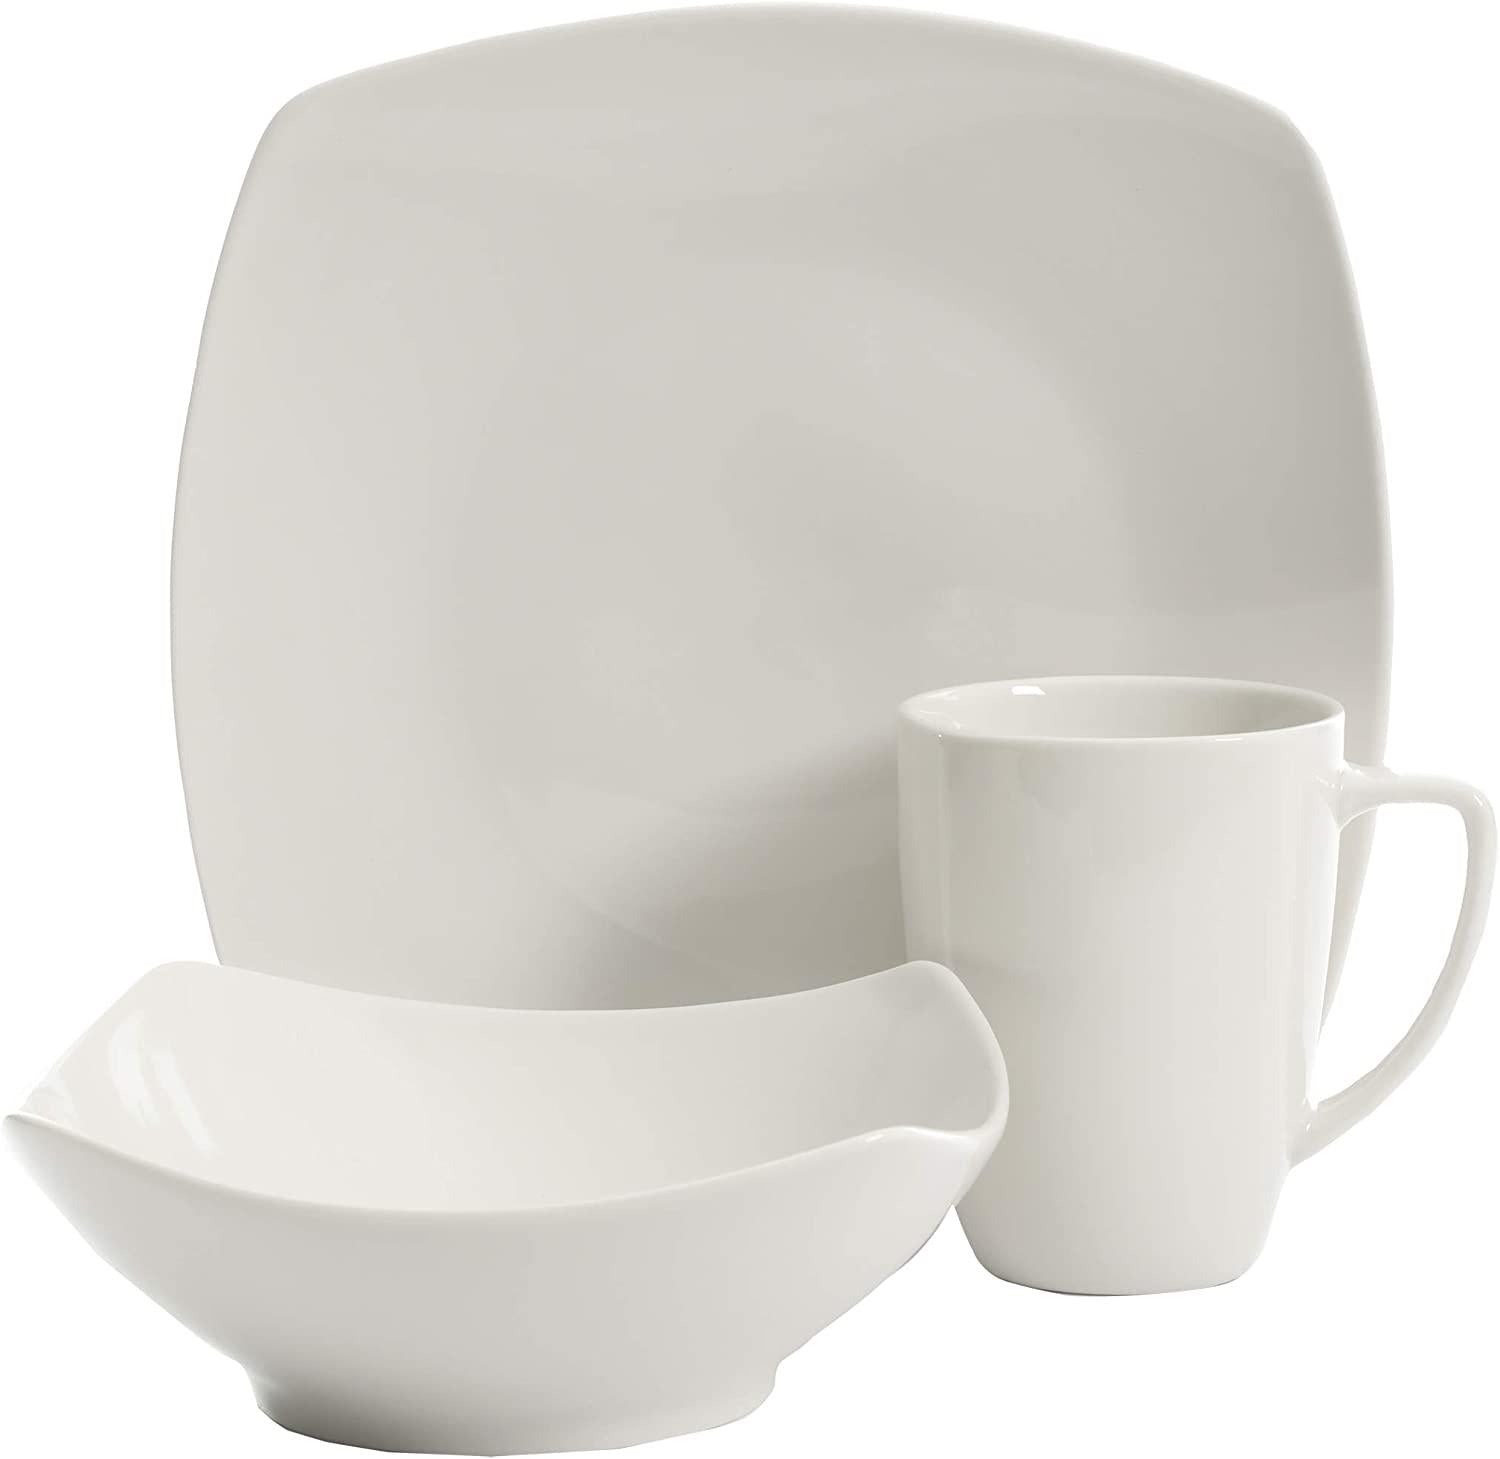 Gibson Home, Gibson Home Amelia Court Porcelain Dinnerware Set, Service for 4 (12pcs), White (Soft Square)